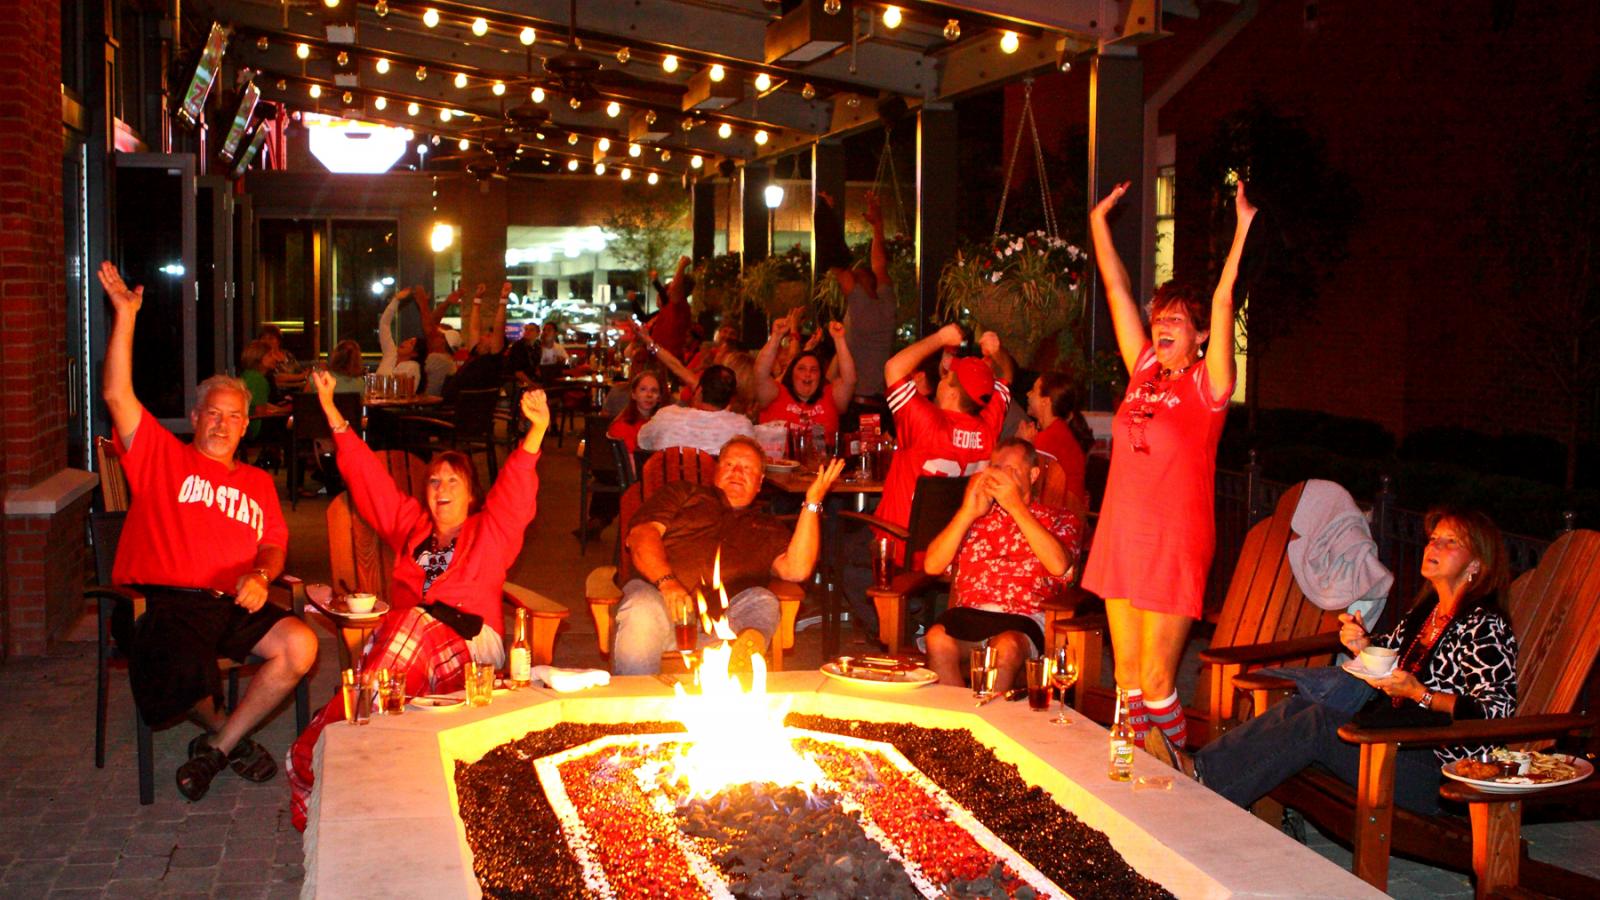 Buckeye Hall of Fame Grill firepit with people Photo Credit: Buckeye Hall of Fame Grill